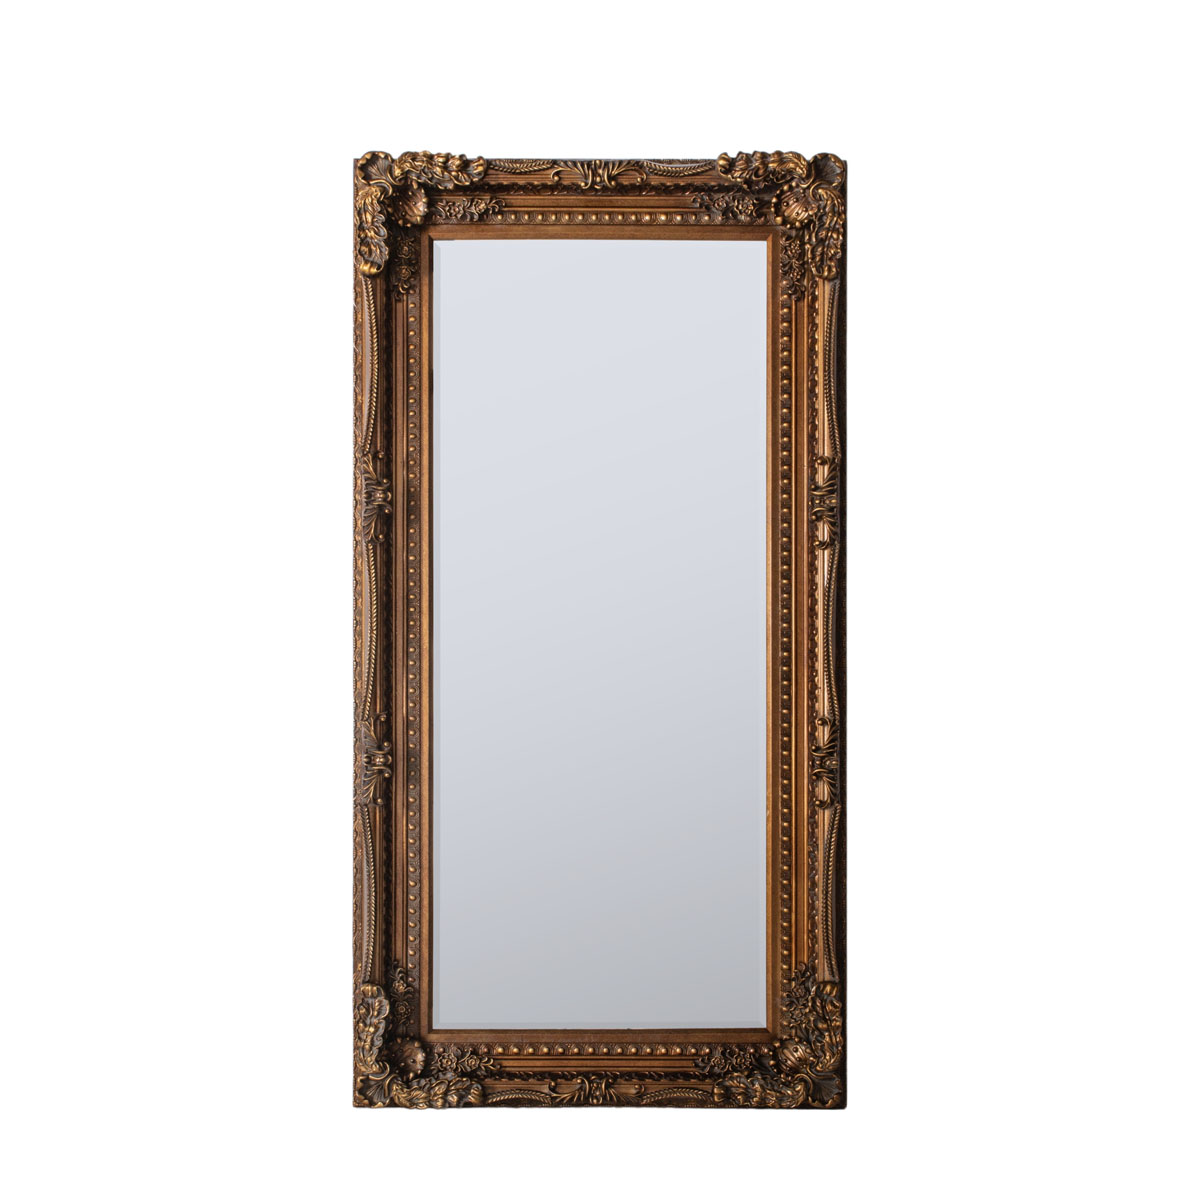 Carved Louis Leaner Mirror Gold 1755x895mm